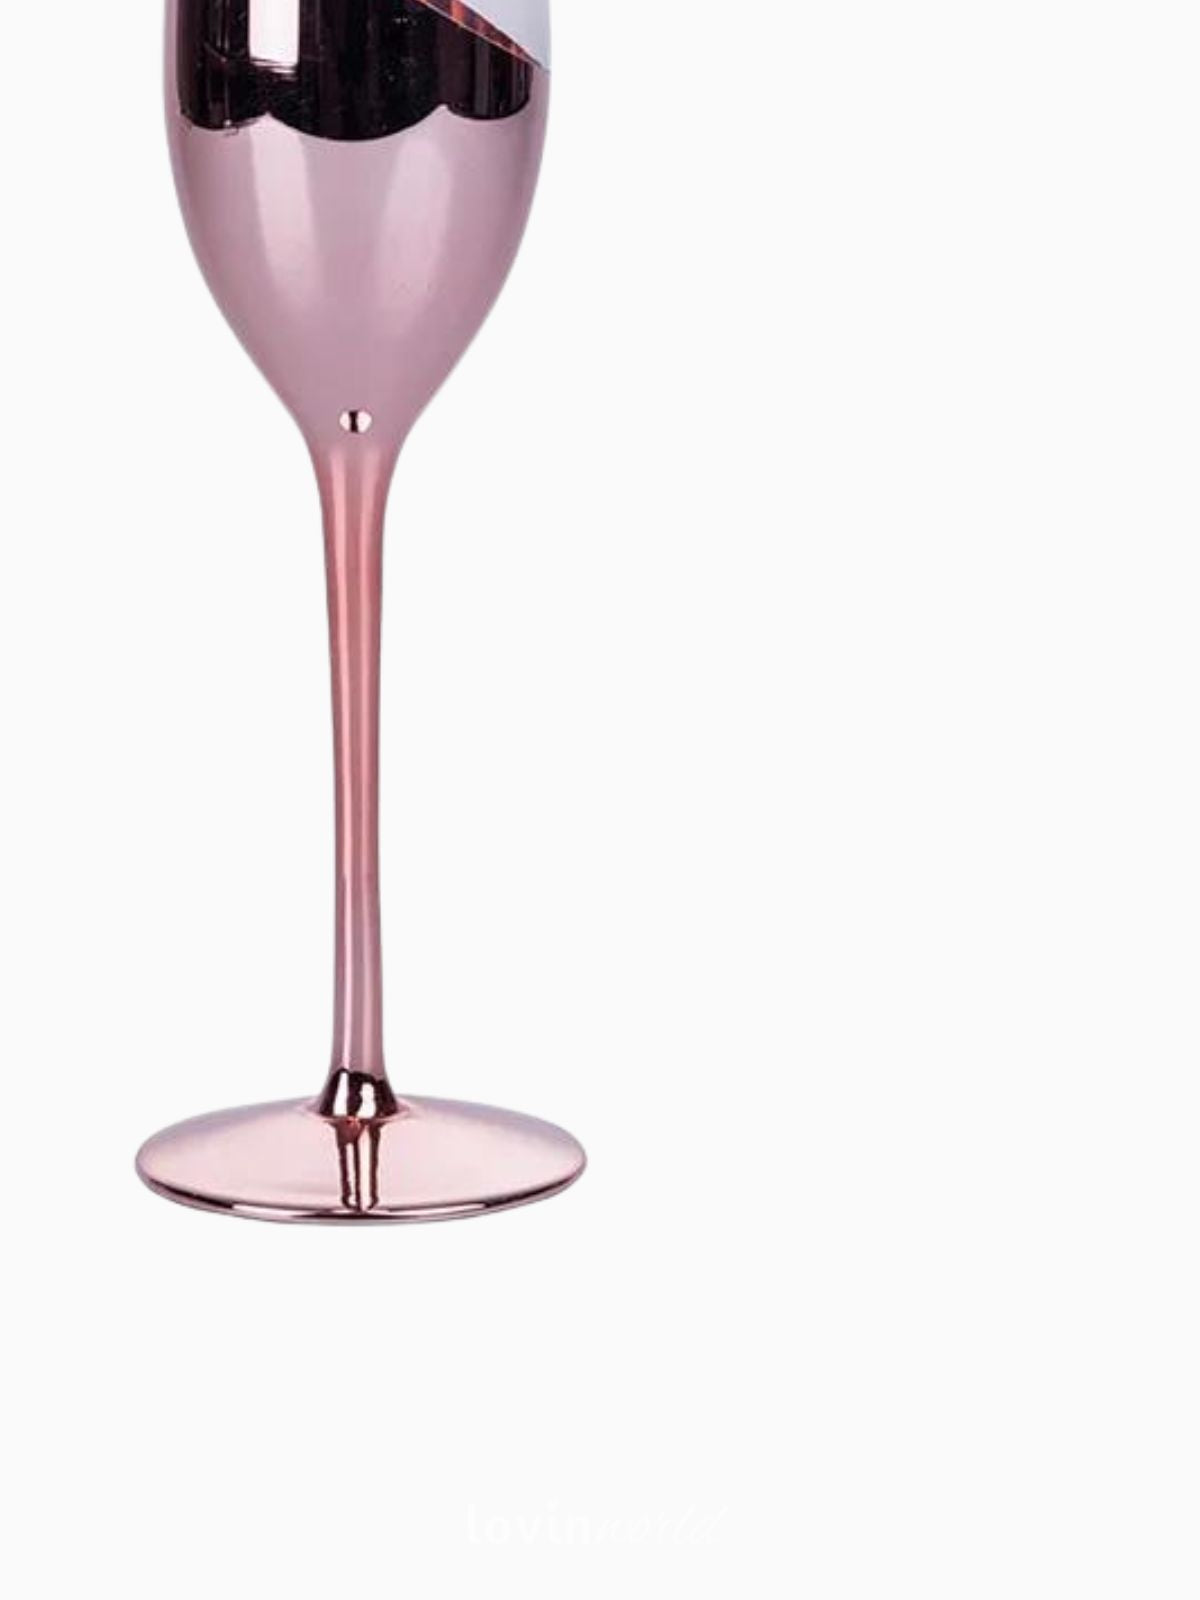 Set 6 Flûte champange Chic metallic finish, in colore rose gold 28 cl-4